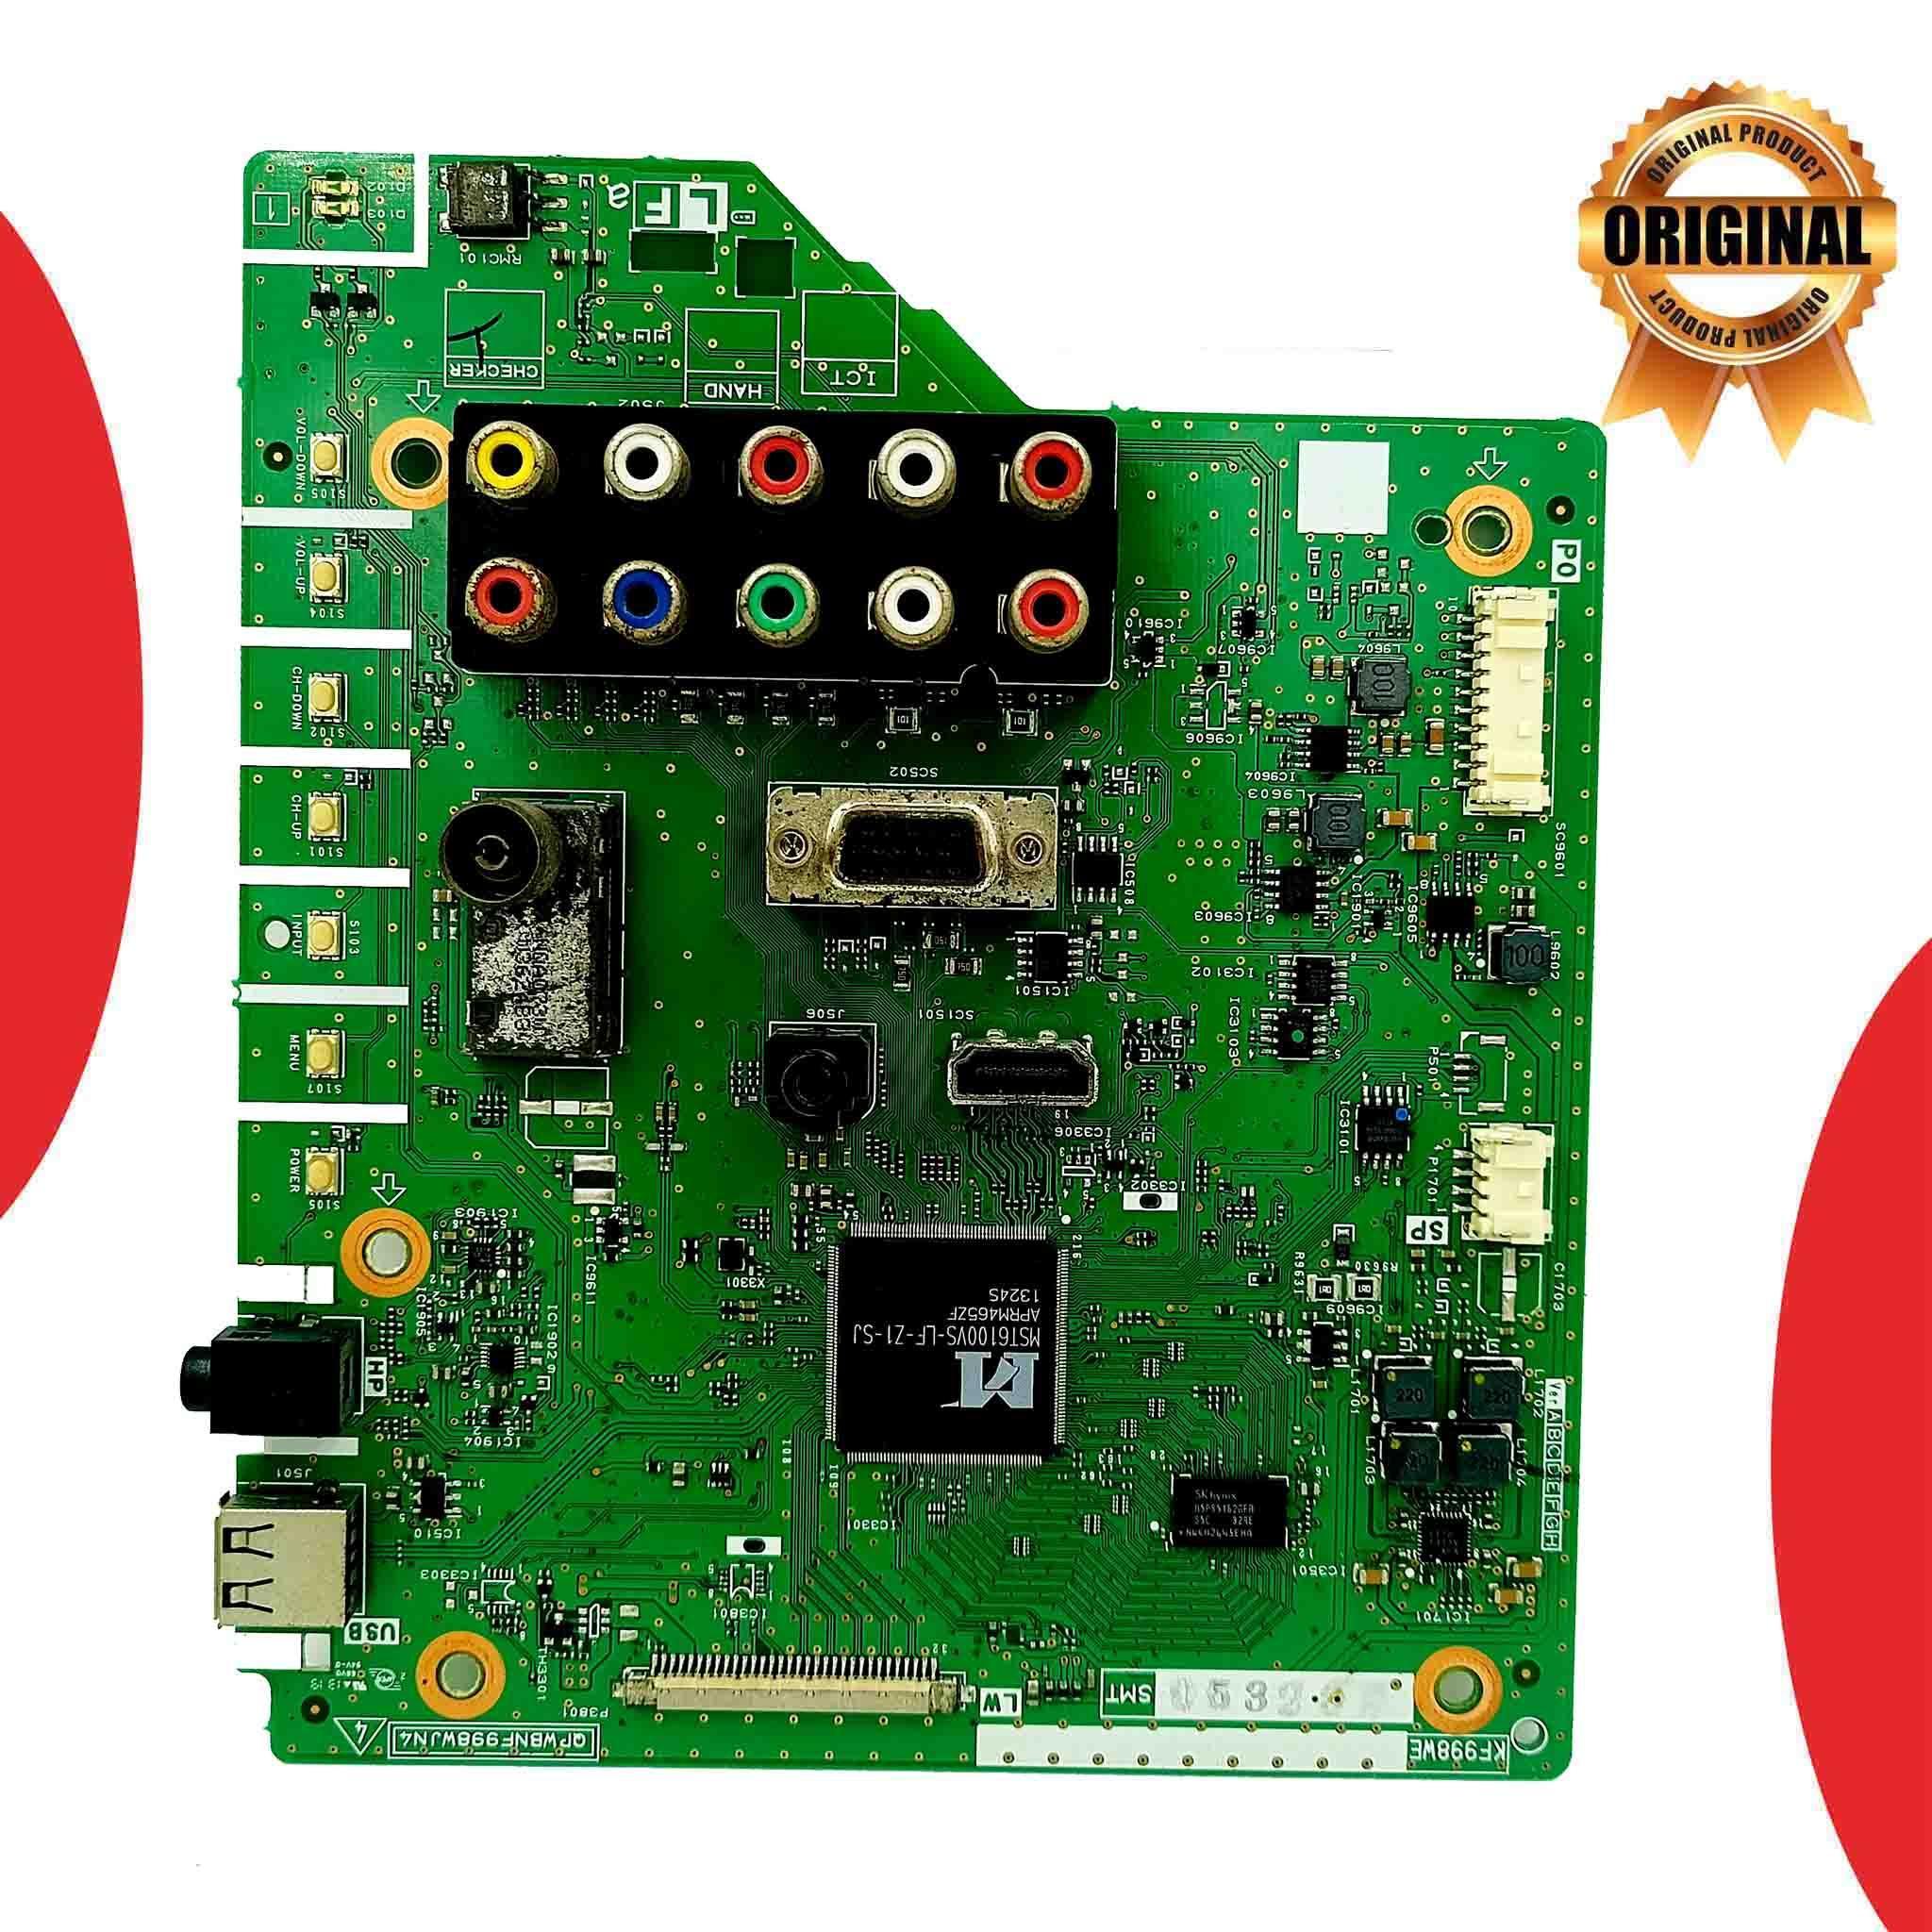 Sharp 32 inch LED TV Motherboard for Model 32LE341M - Great Bharat Electronics